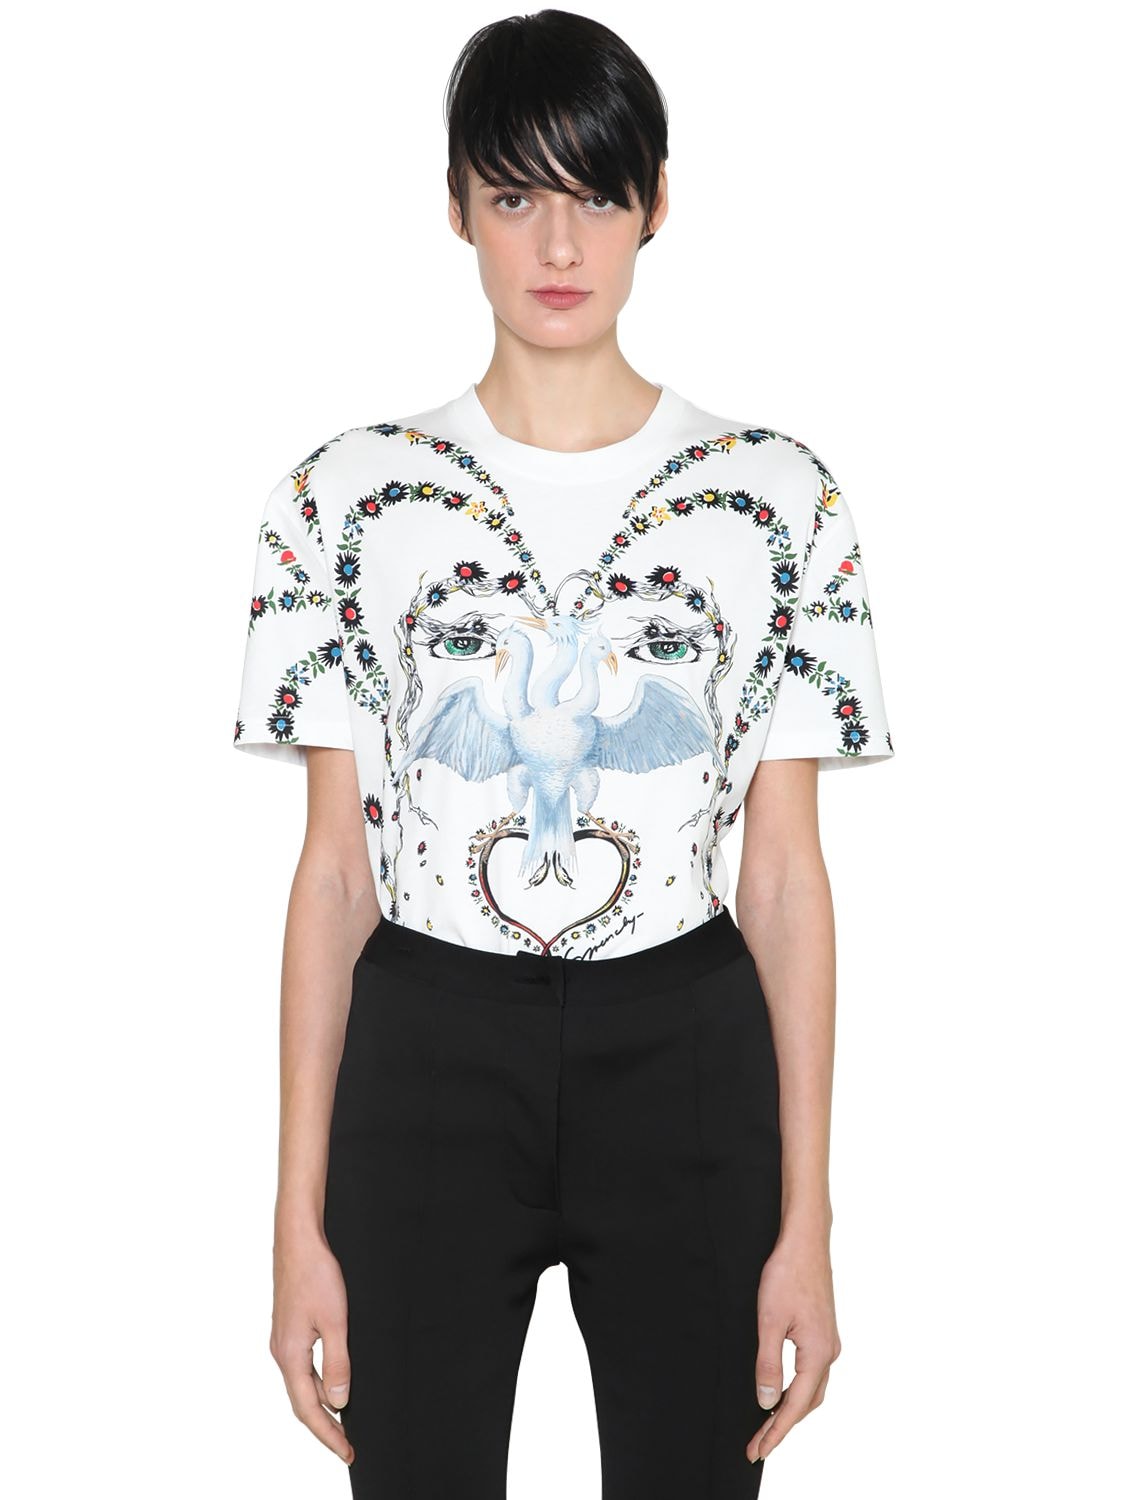 GIVENCHY PRINTED COTTON JERSEY T-SHIRT,69ID19014-MTAW0